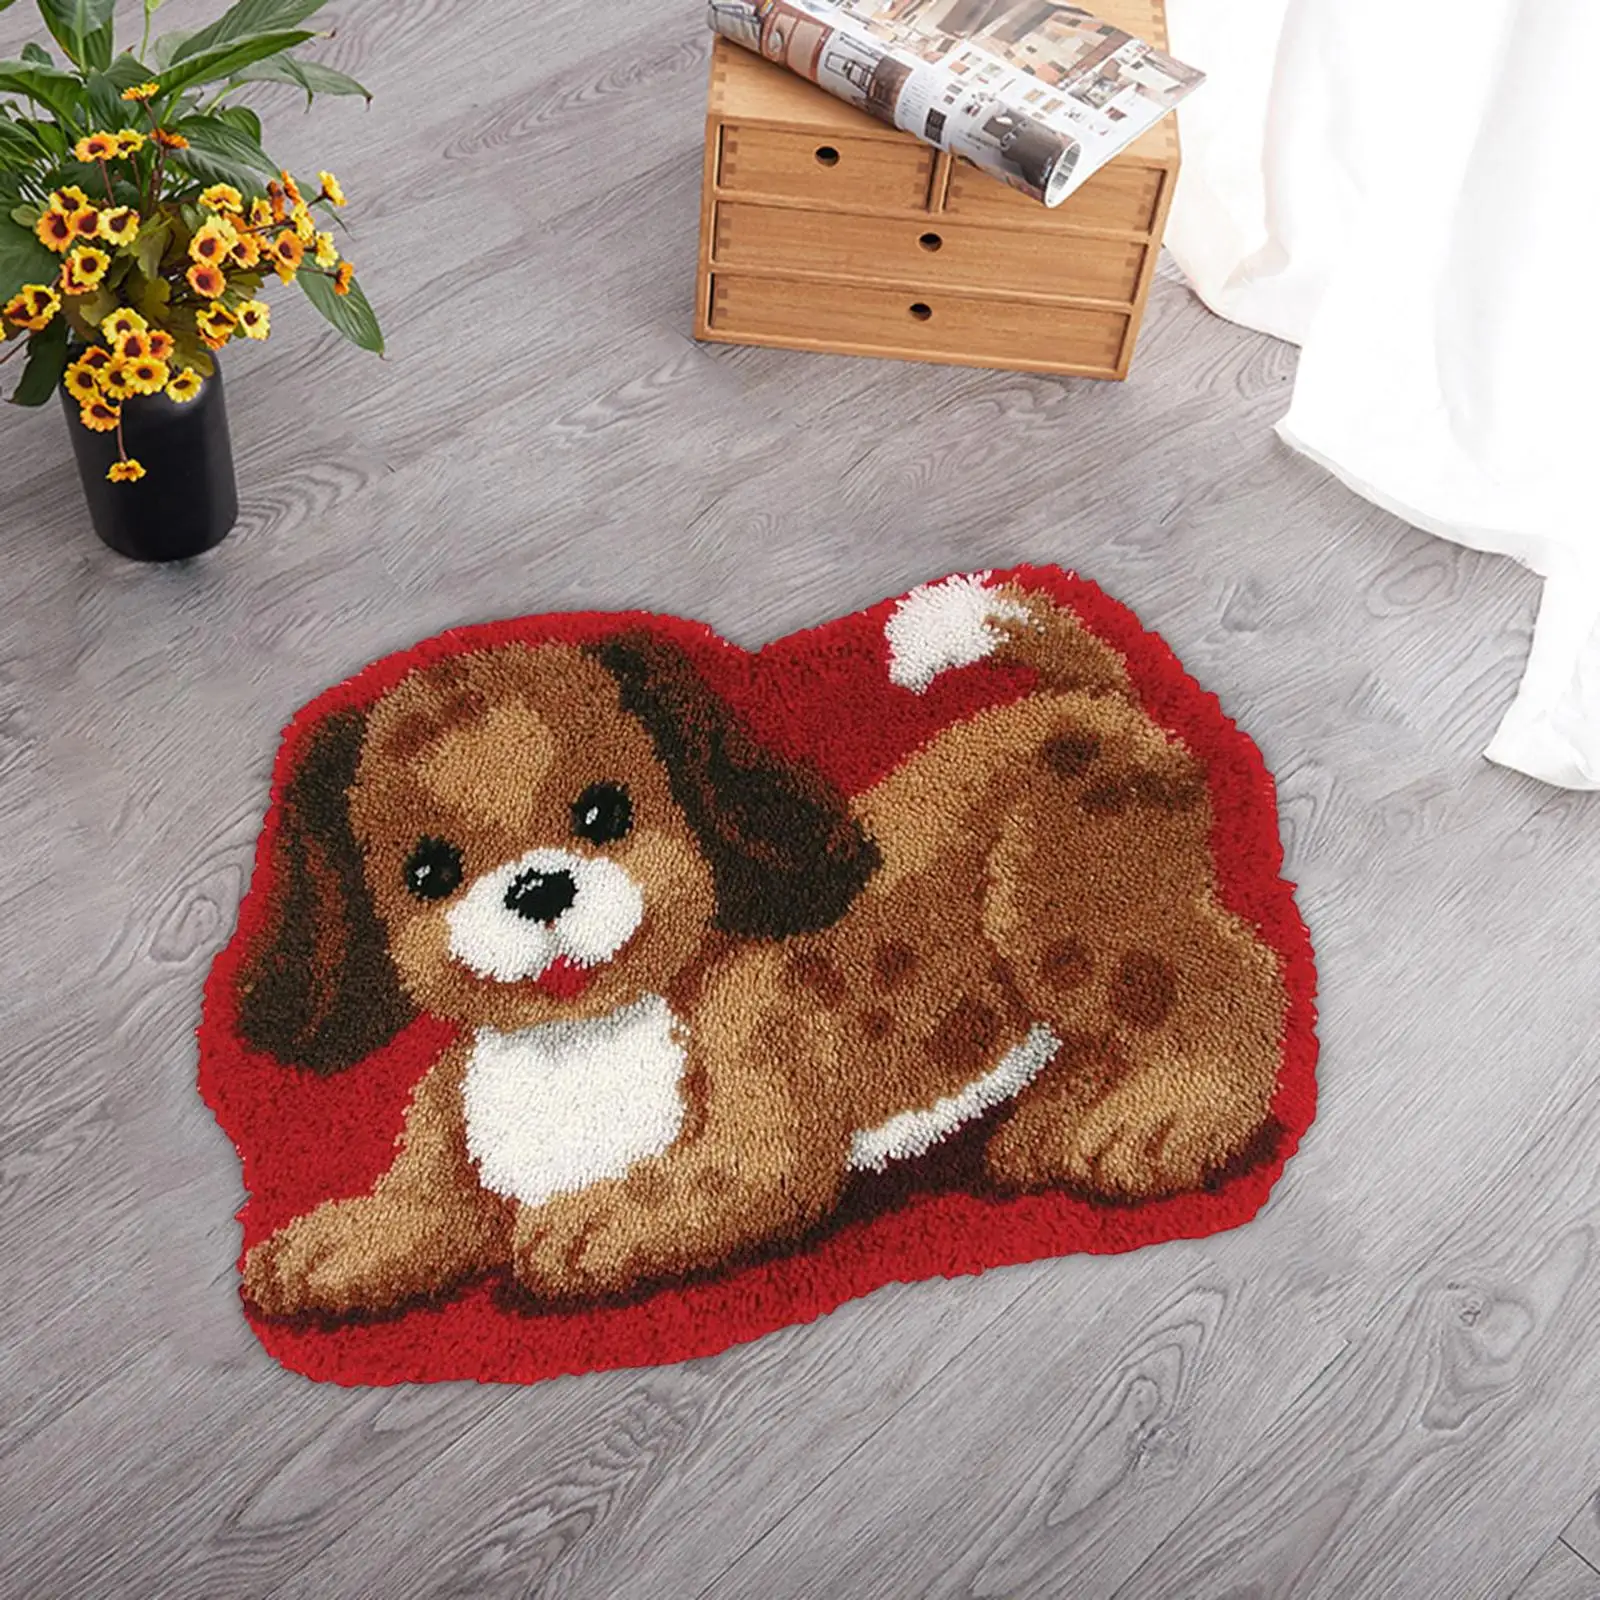 Latch DIY Rug Making Kit Embroidery Rug Kit Cute Dog 24 X 16 Inch Animal Pattern Rug Latch Hook Kits for Rug Home Beginners